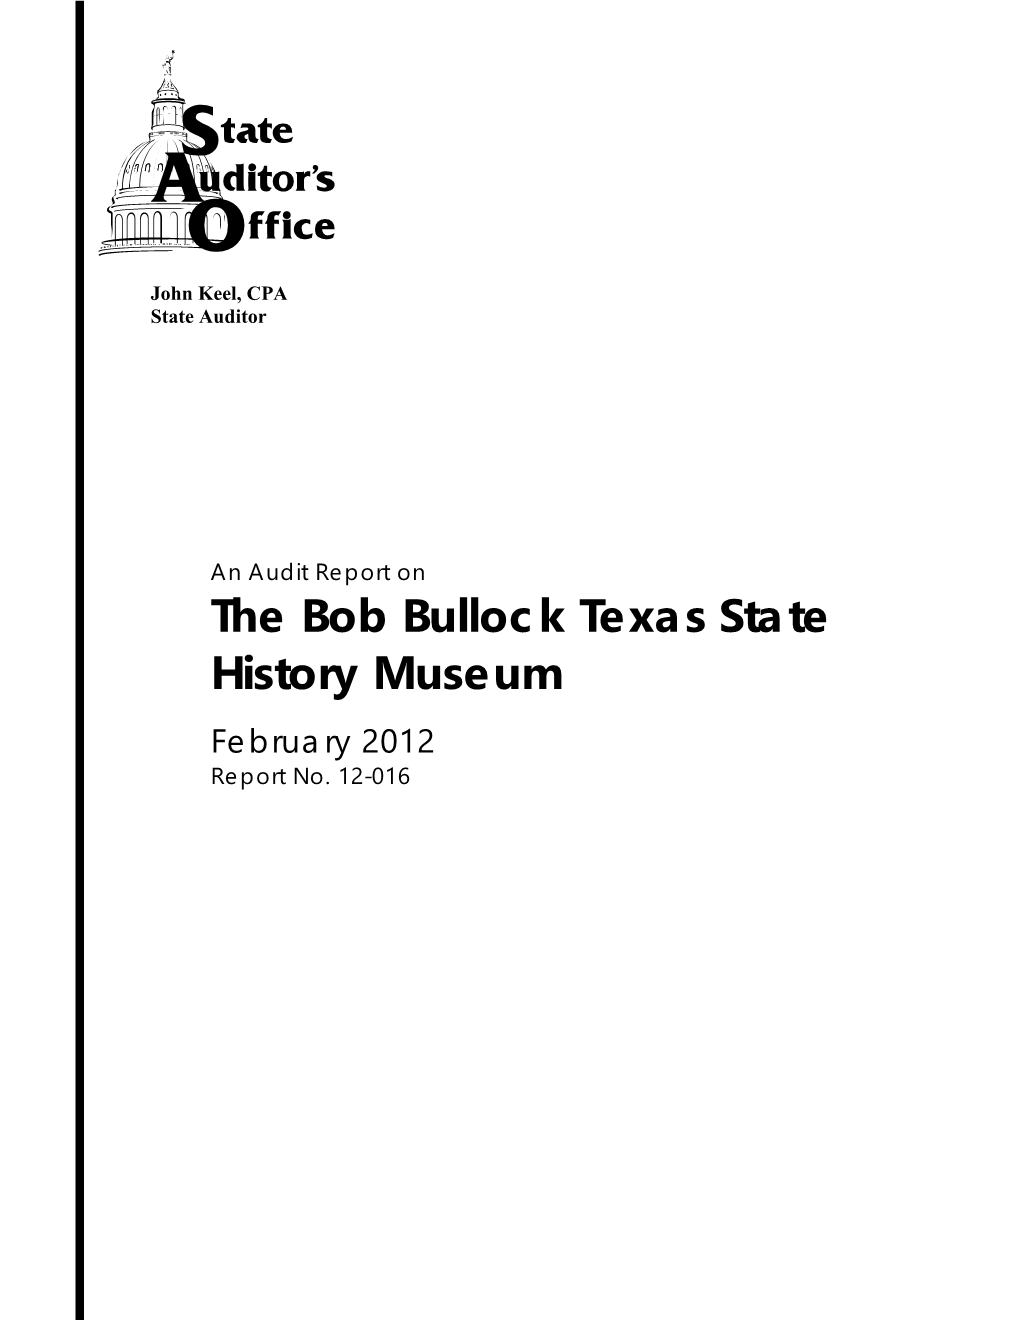 An Audit Report on the Bob Bullock Texas State History Museum February 2012 Report No